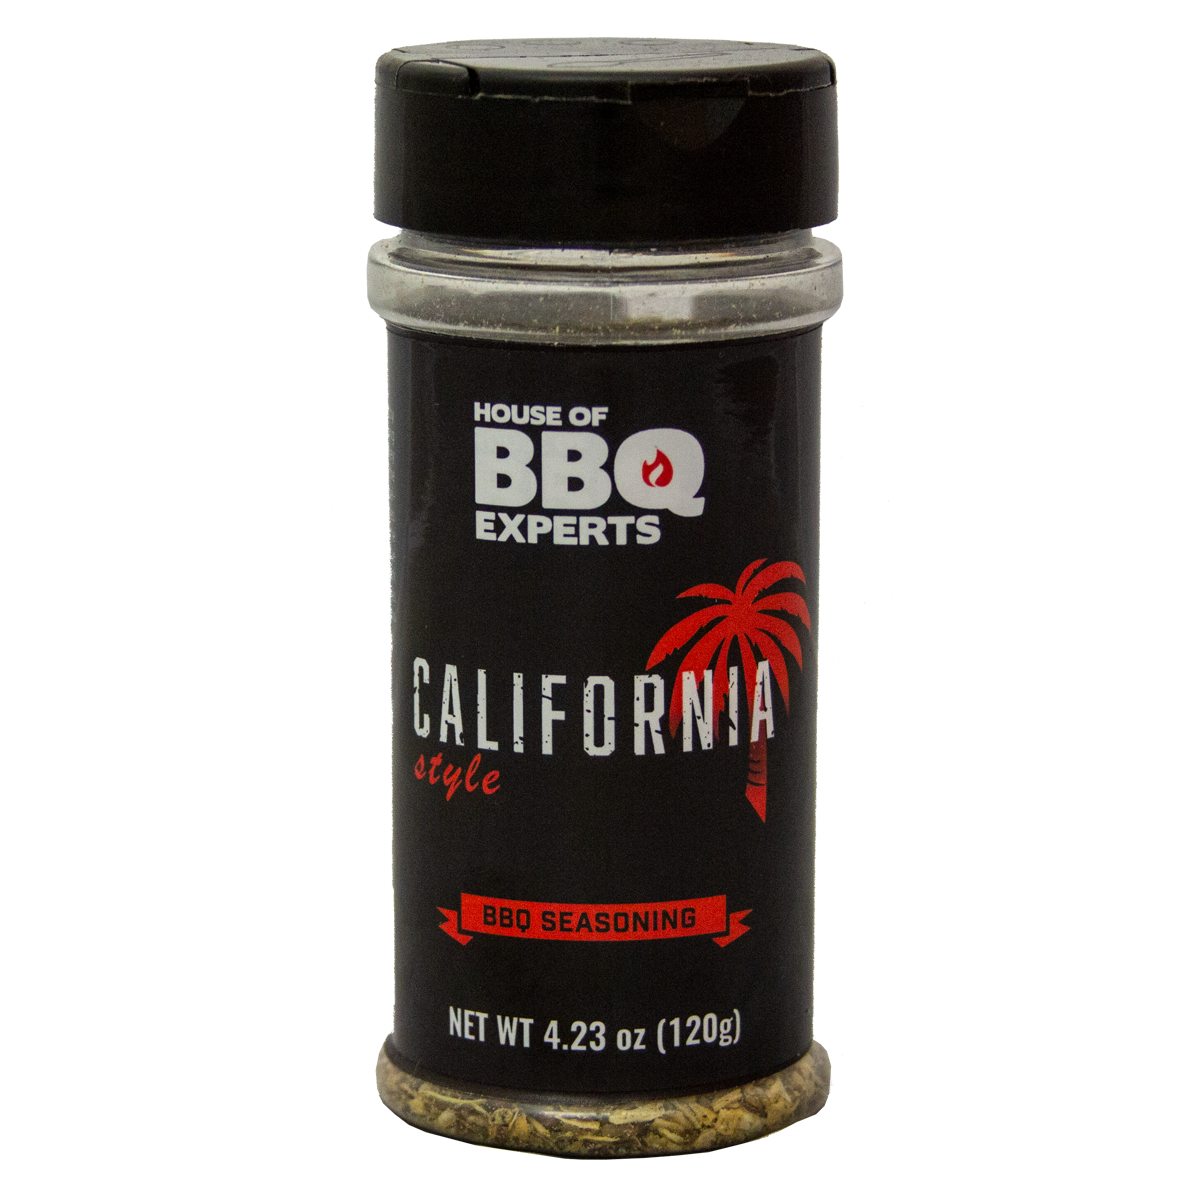 House of BBQ Experts California Spice Mix and Rub 120g (4.23 oz)